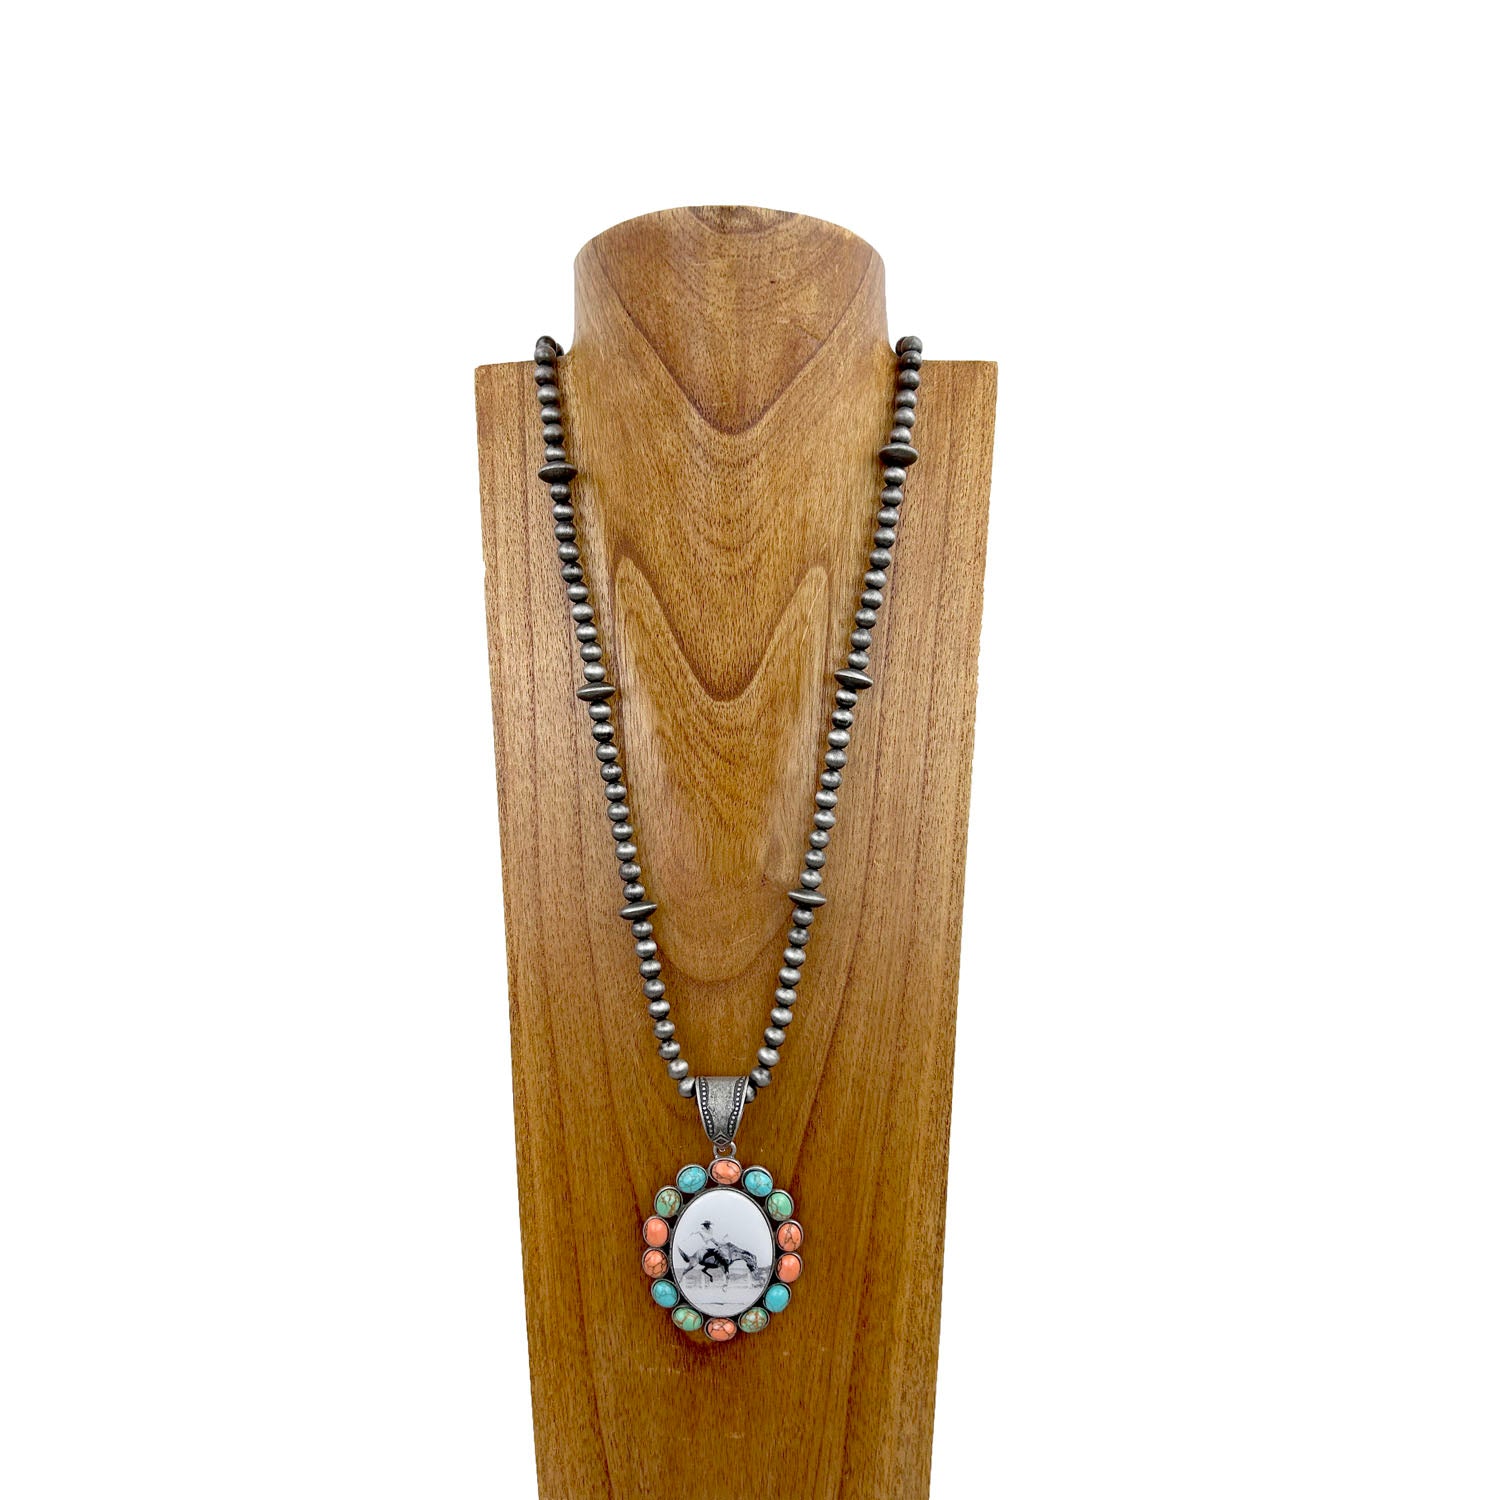 NKS230708-32	" 36 Inches long silver Navajo pearl beads with muti color stone  oval cowboy pendant Necklace"